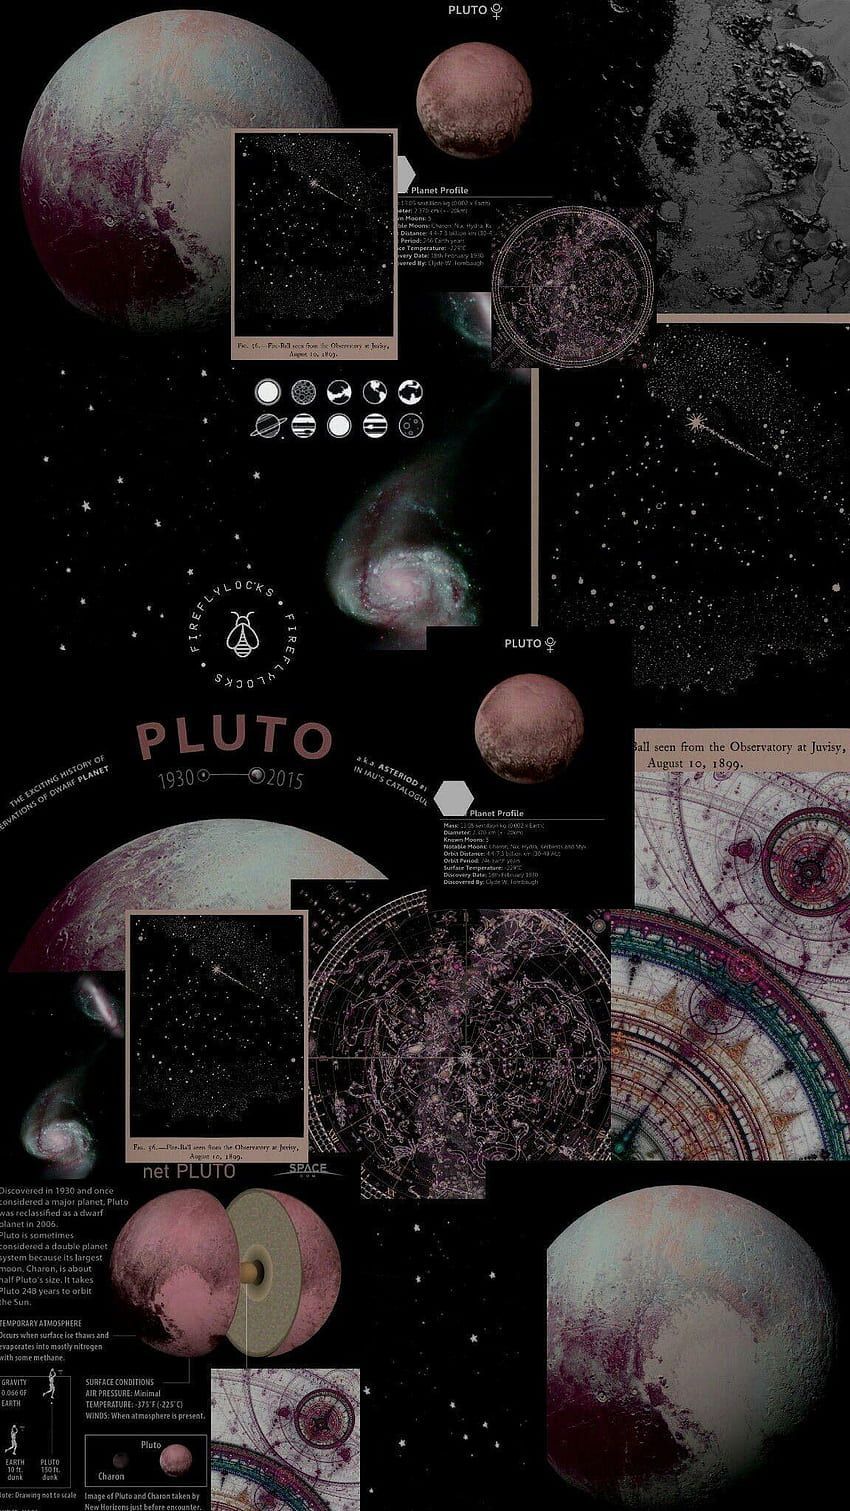 A collage of images showing the planet pluto - Earth, planet, science